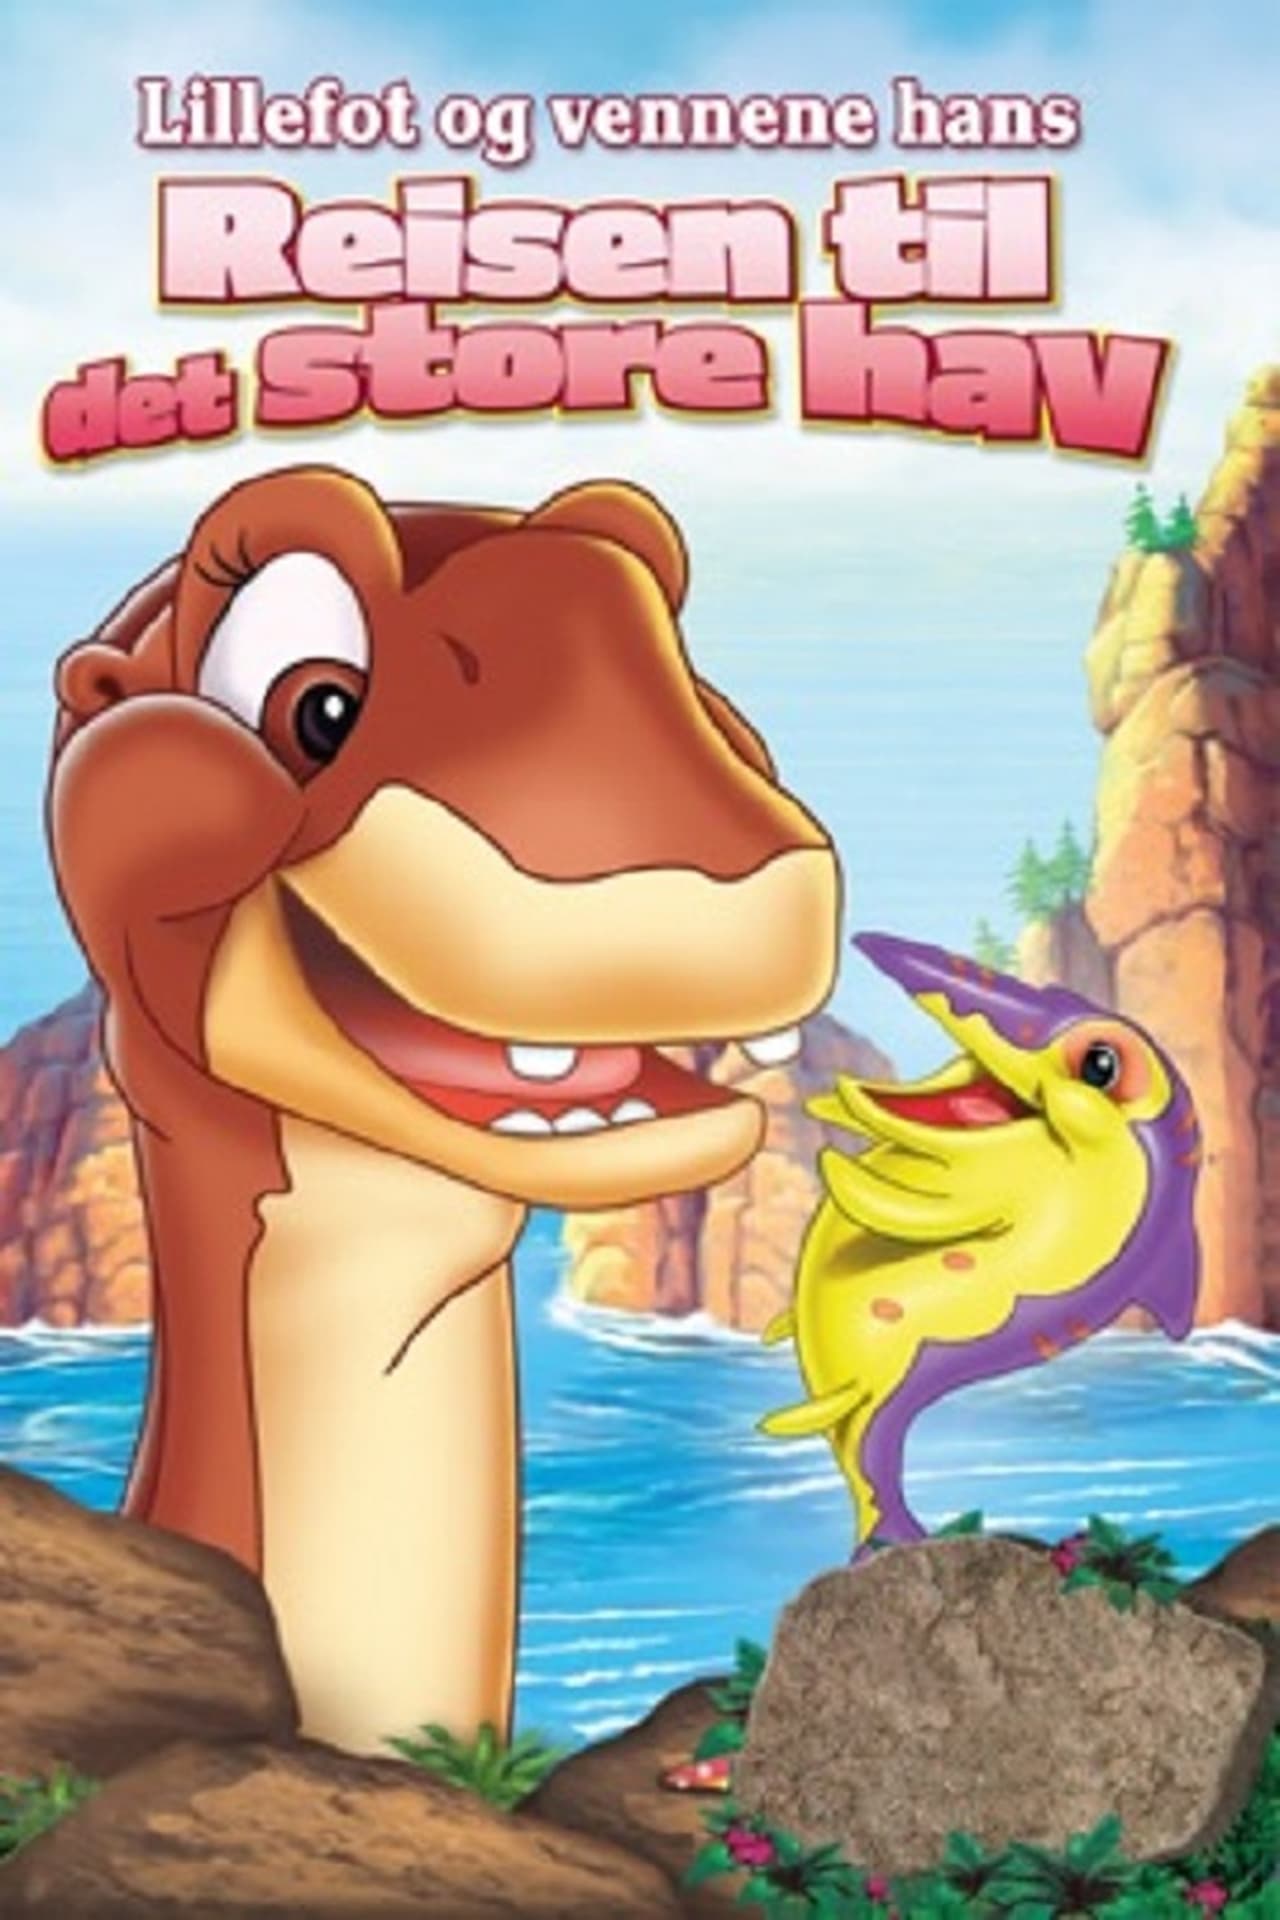 The Land Before Time 9